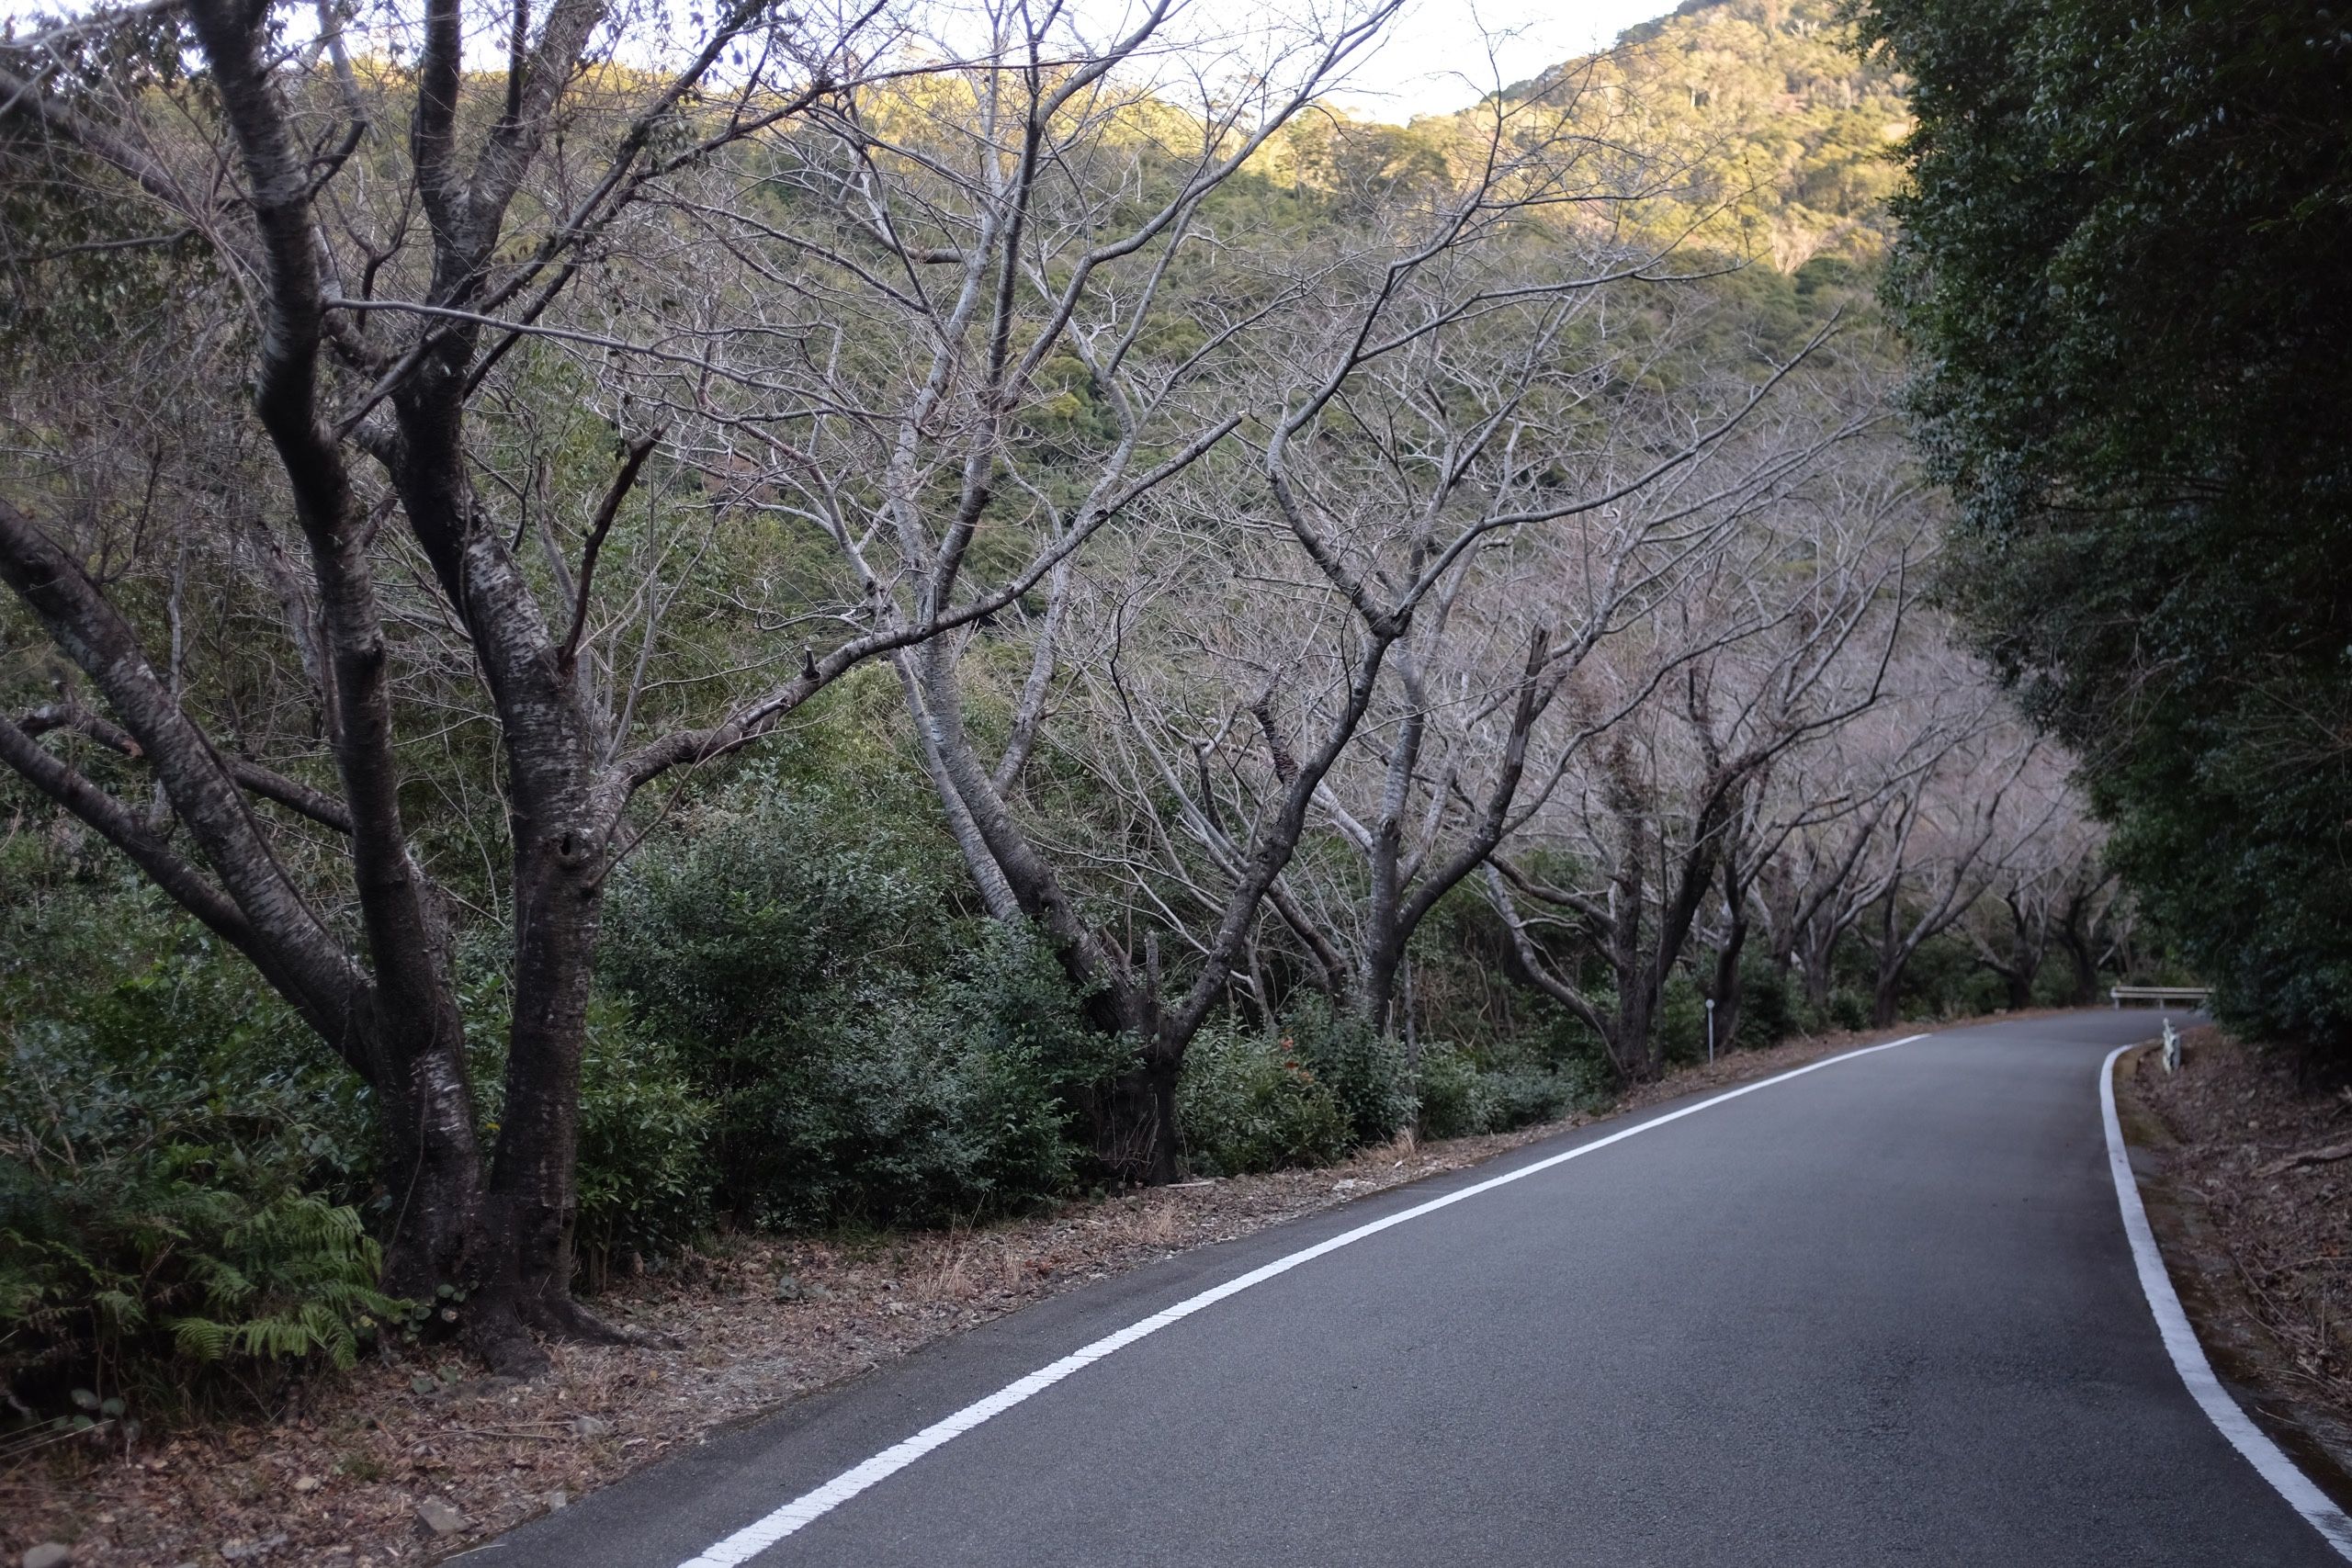 A narrow road lined with cherry trees still without flowers or leaves.